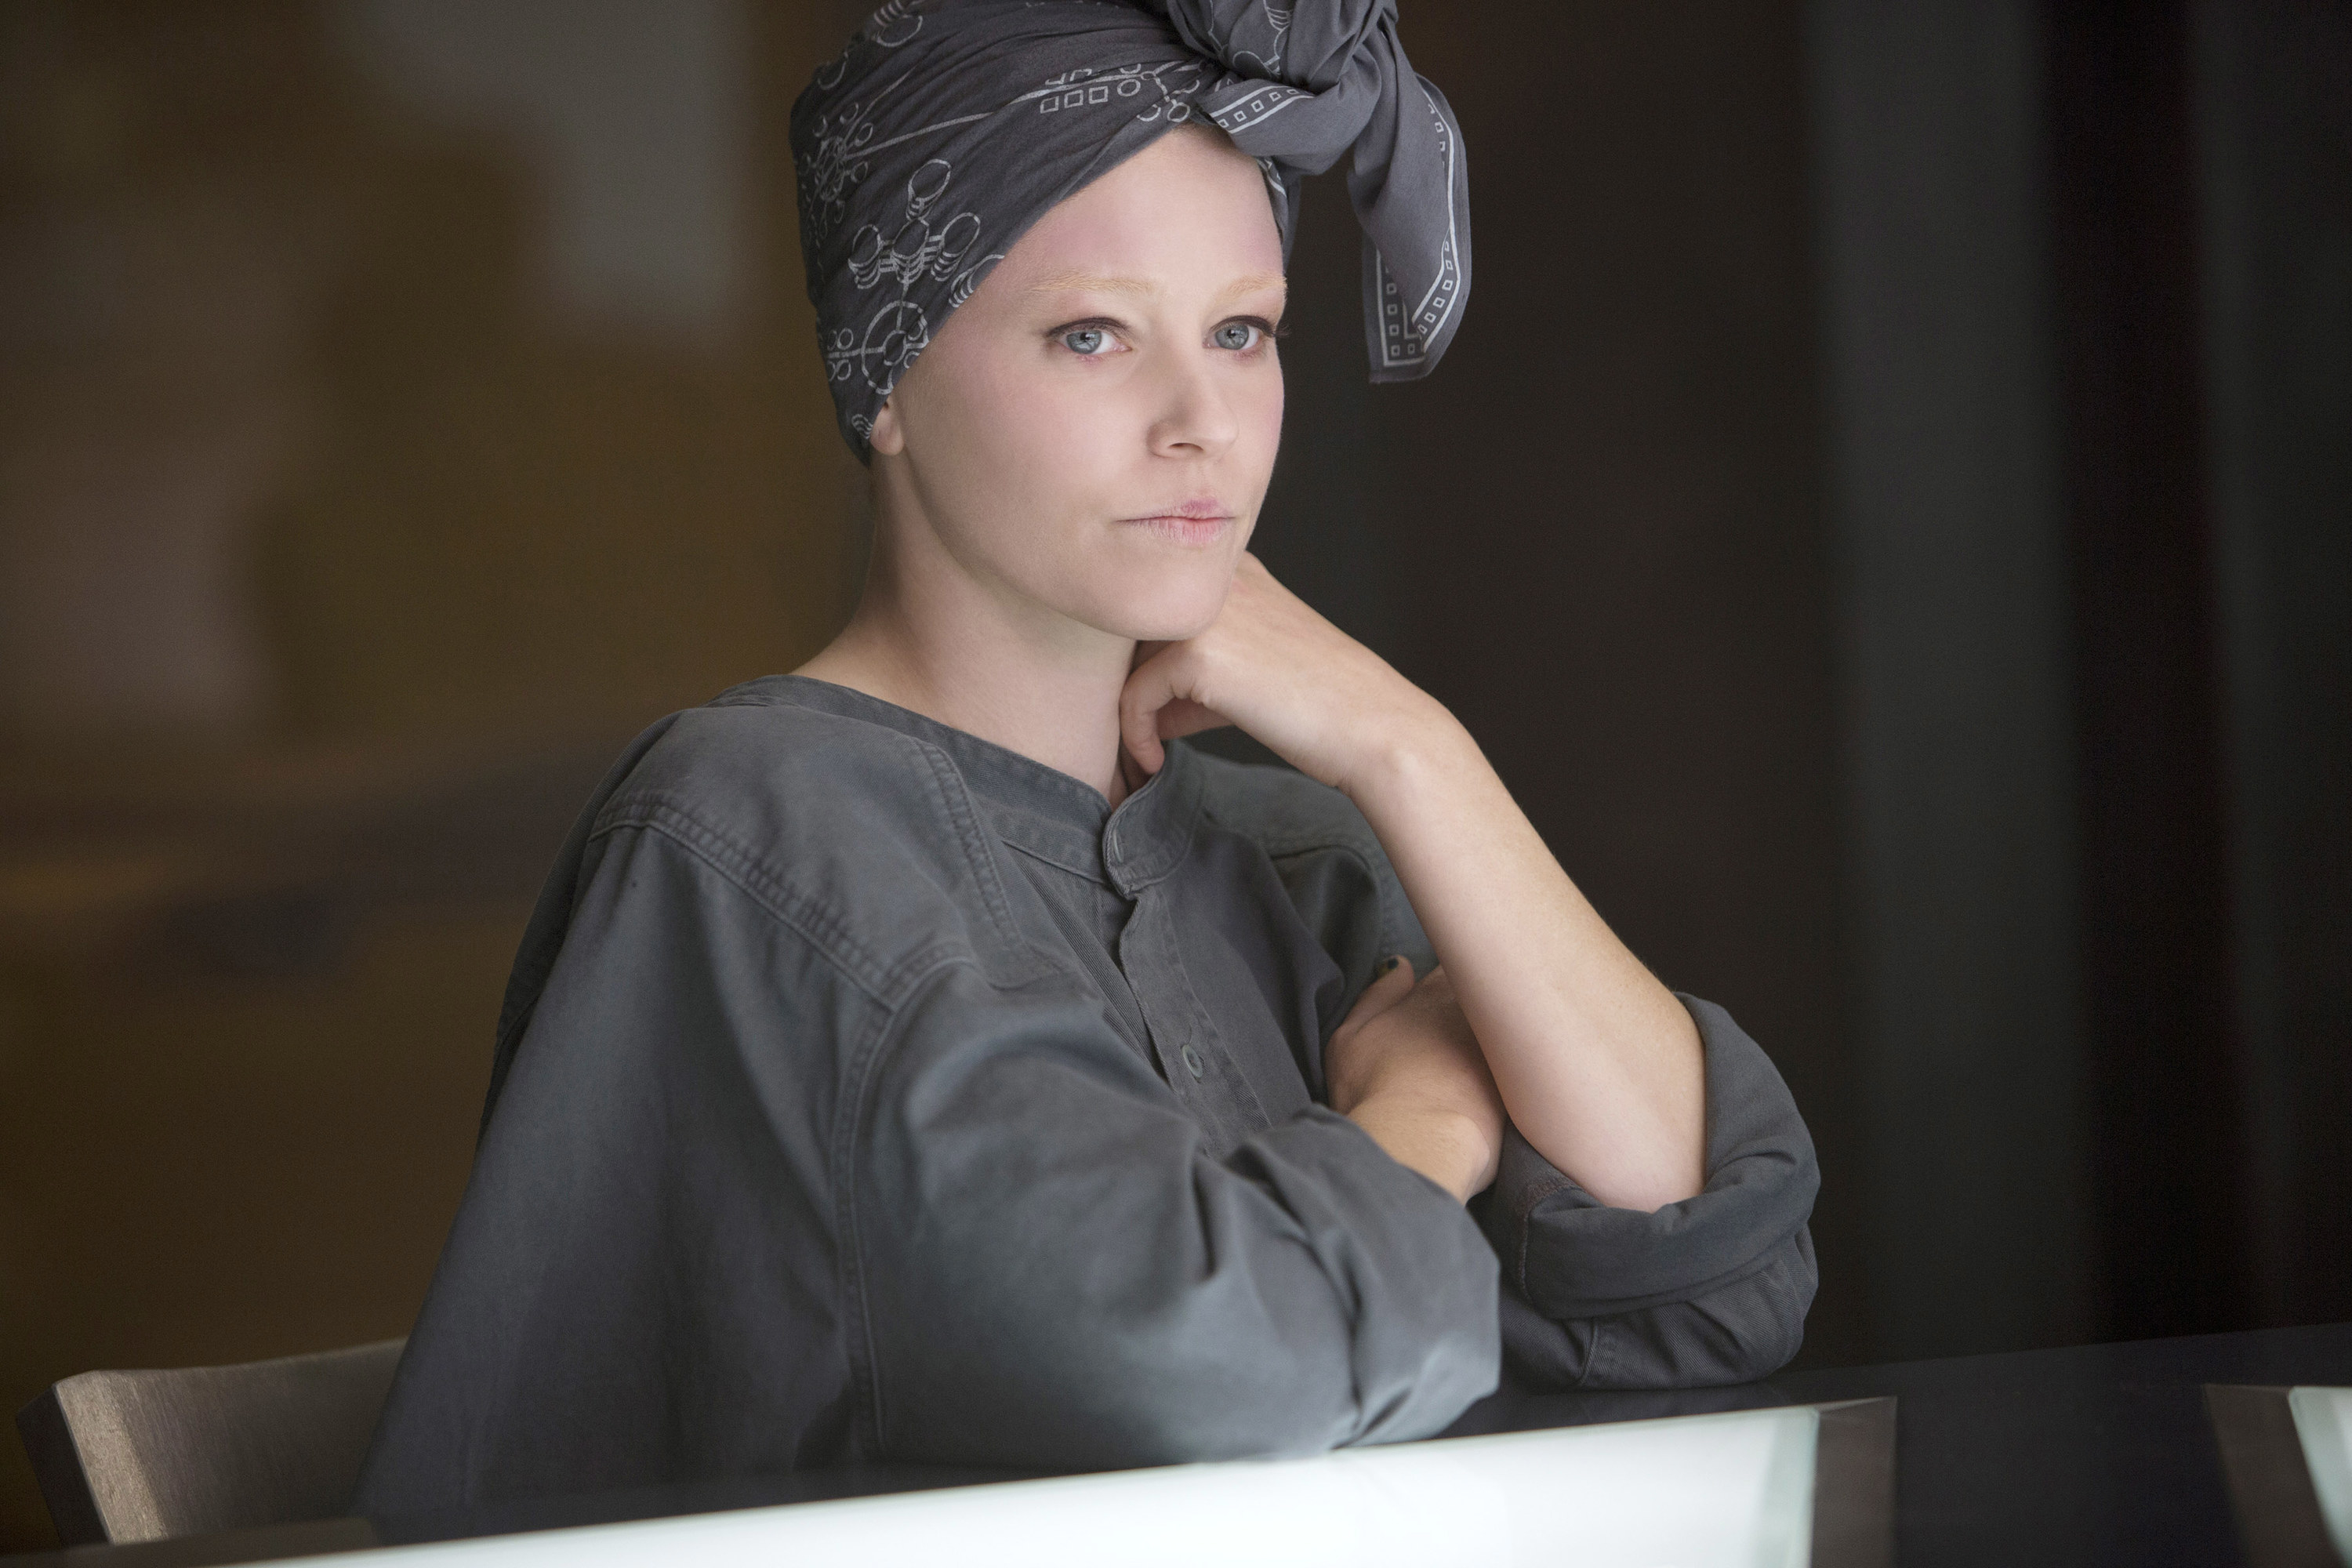 Effie dressed in customized rebel clothing in Mockingjay